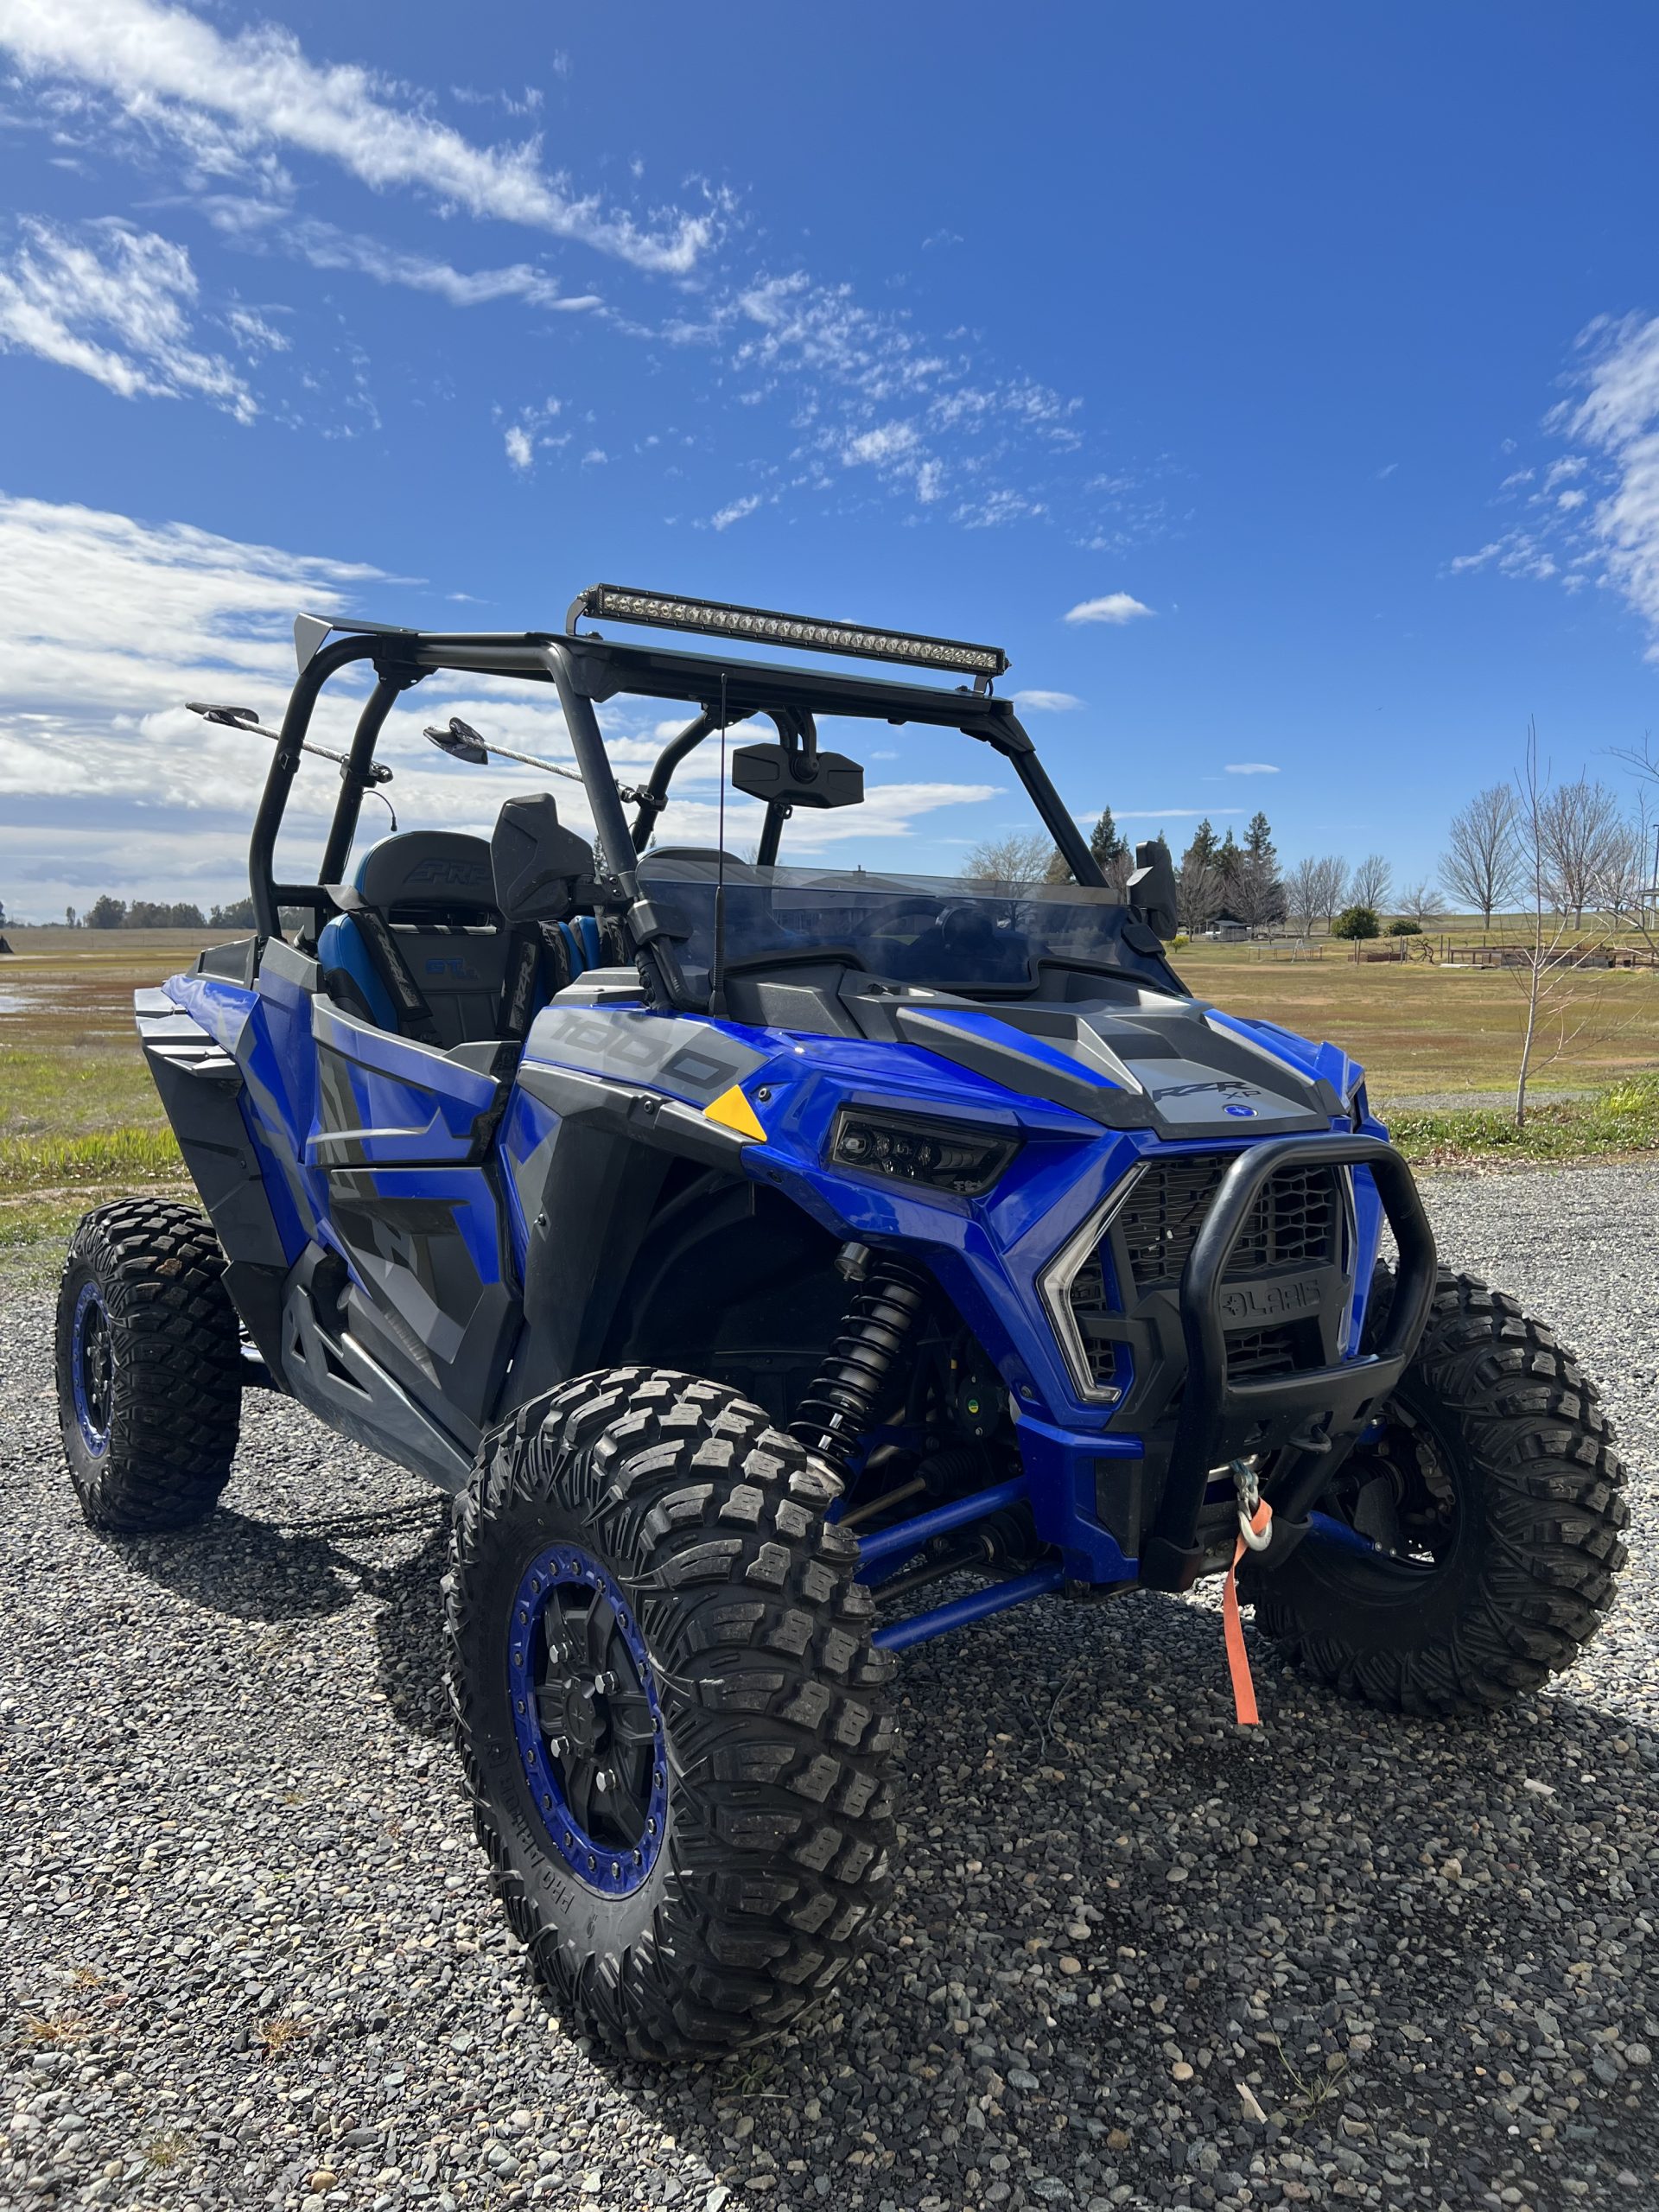 2021 Supercharged RZR 1000 Rock & Trails